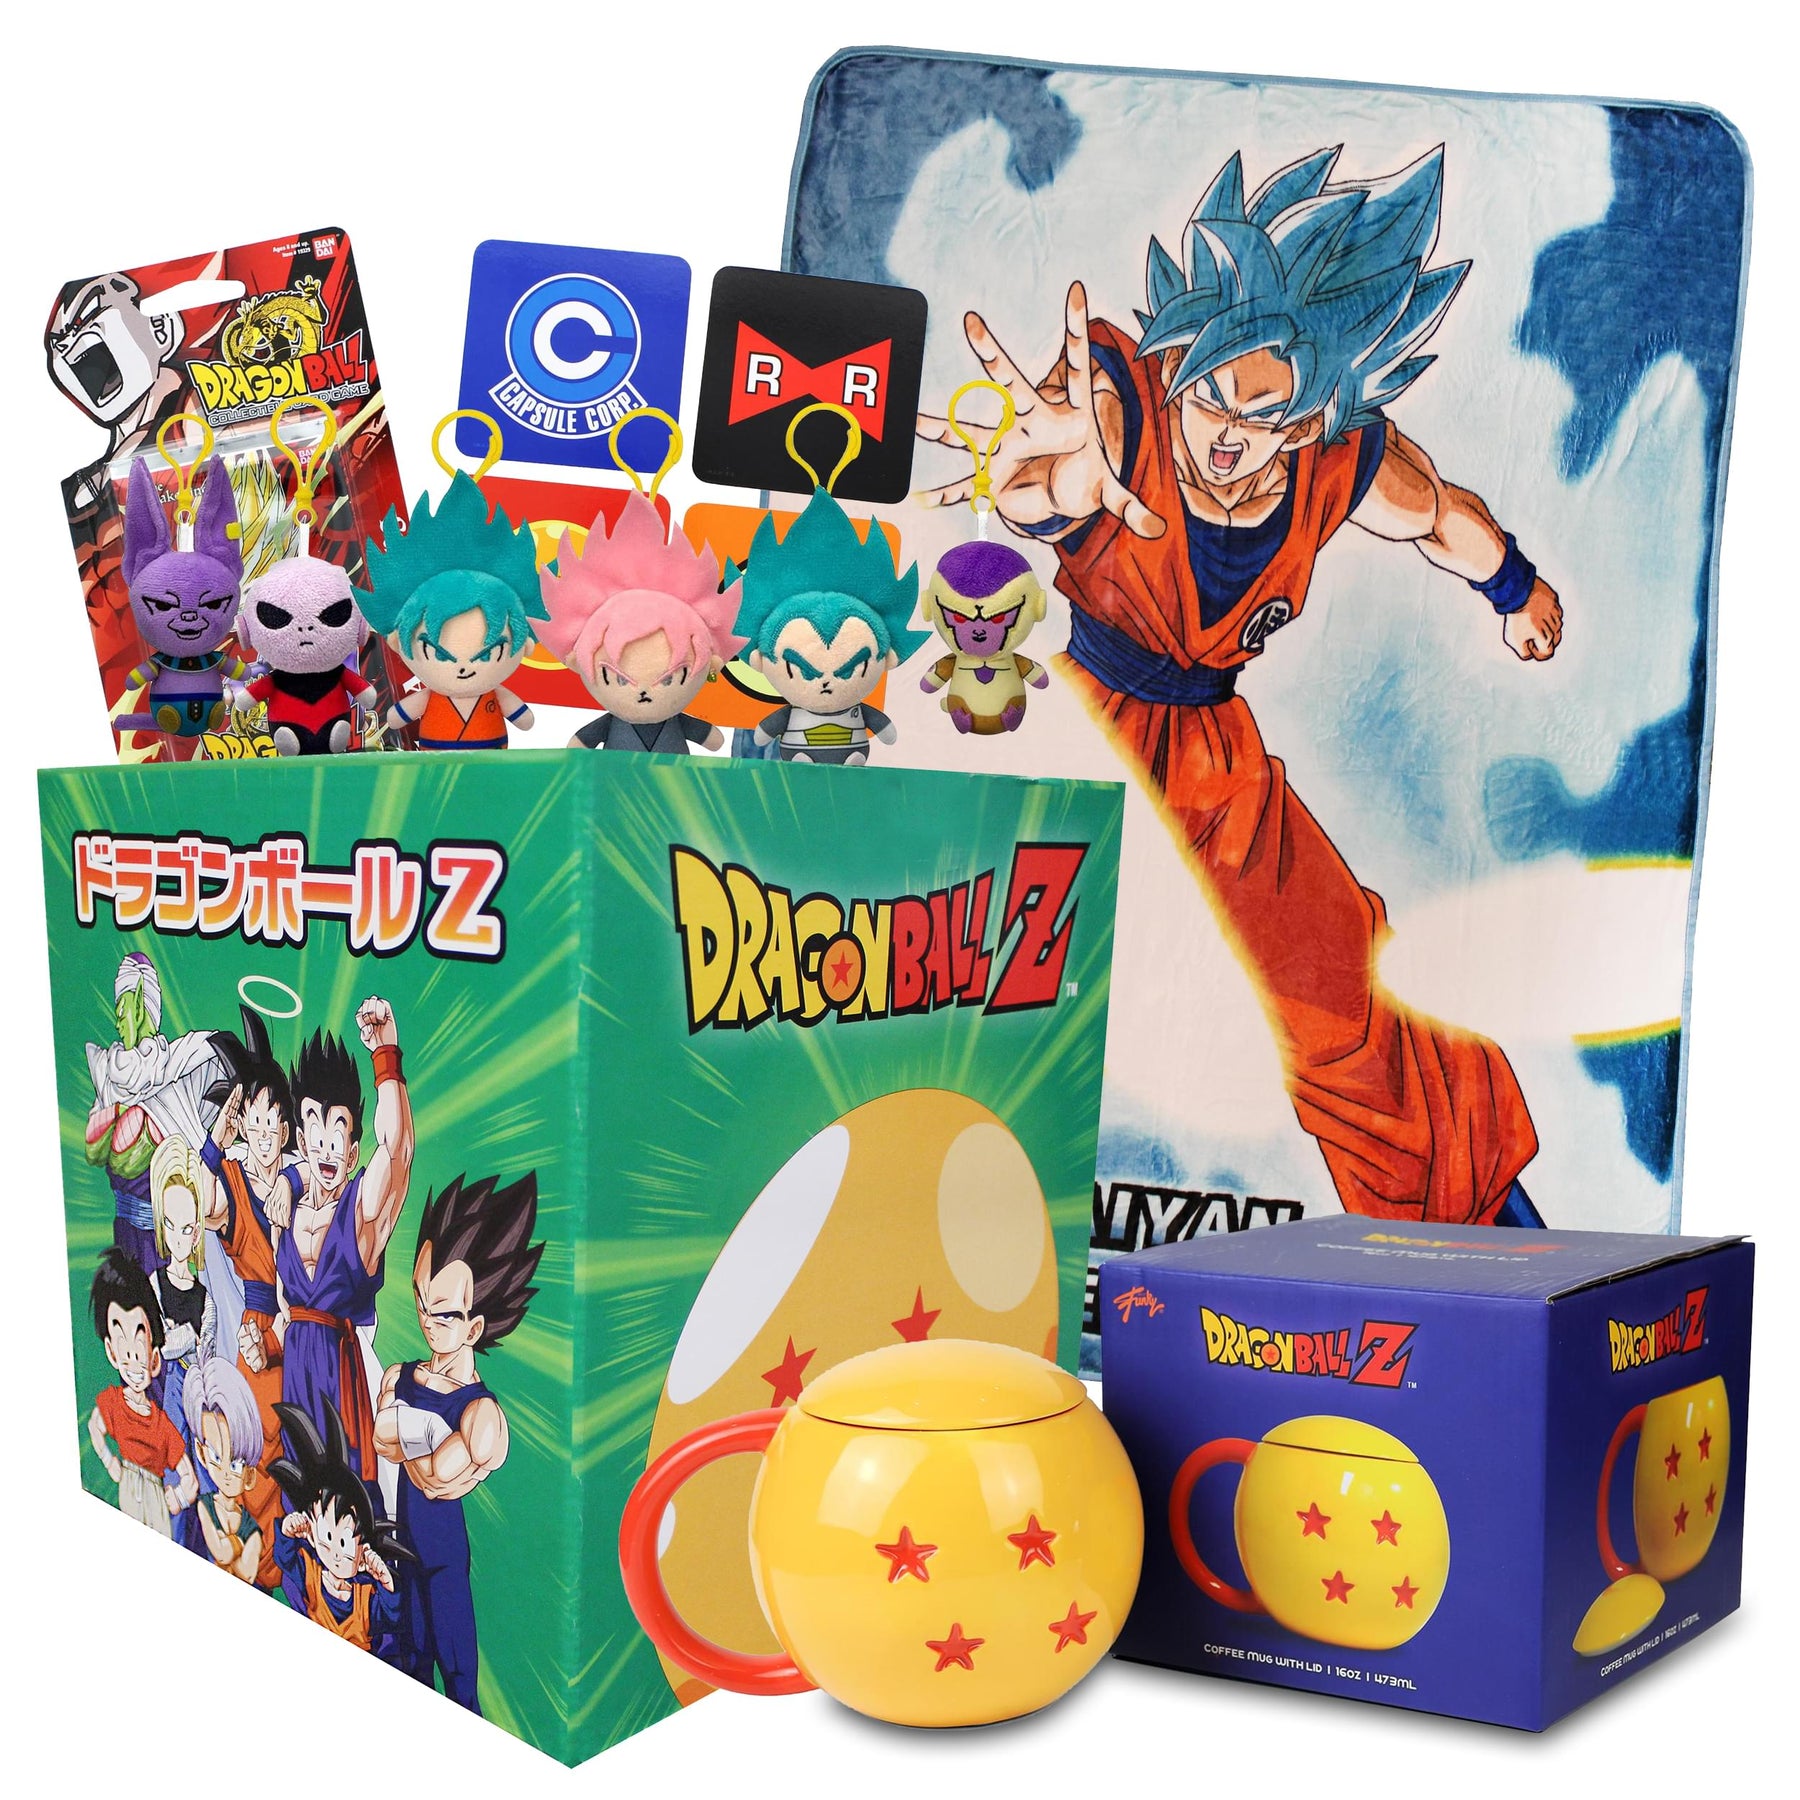 Dragon Ball Z LookSee Subscription Box Version 3 Collectibles for DBZ Collectors